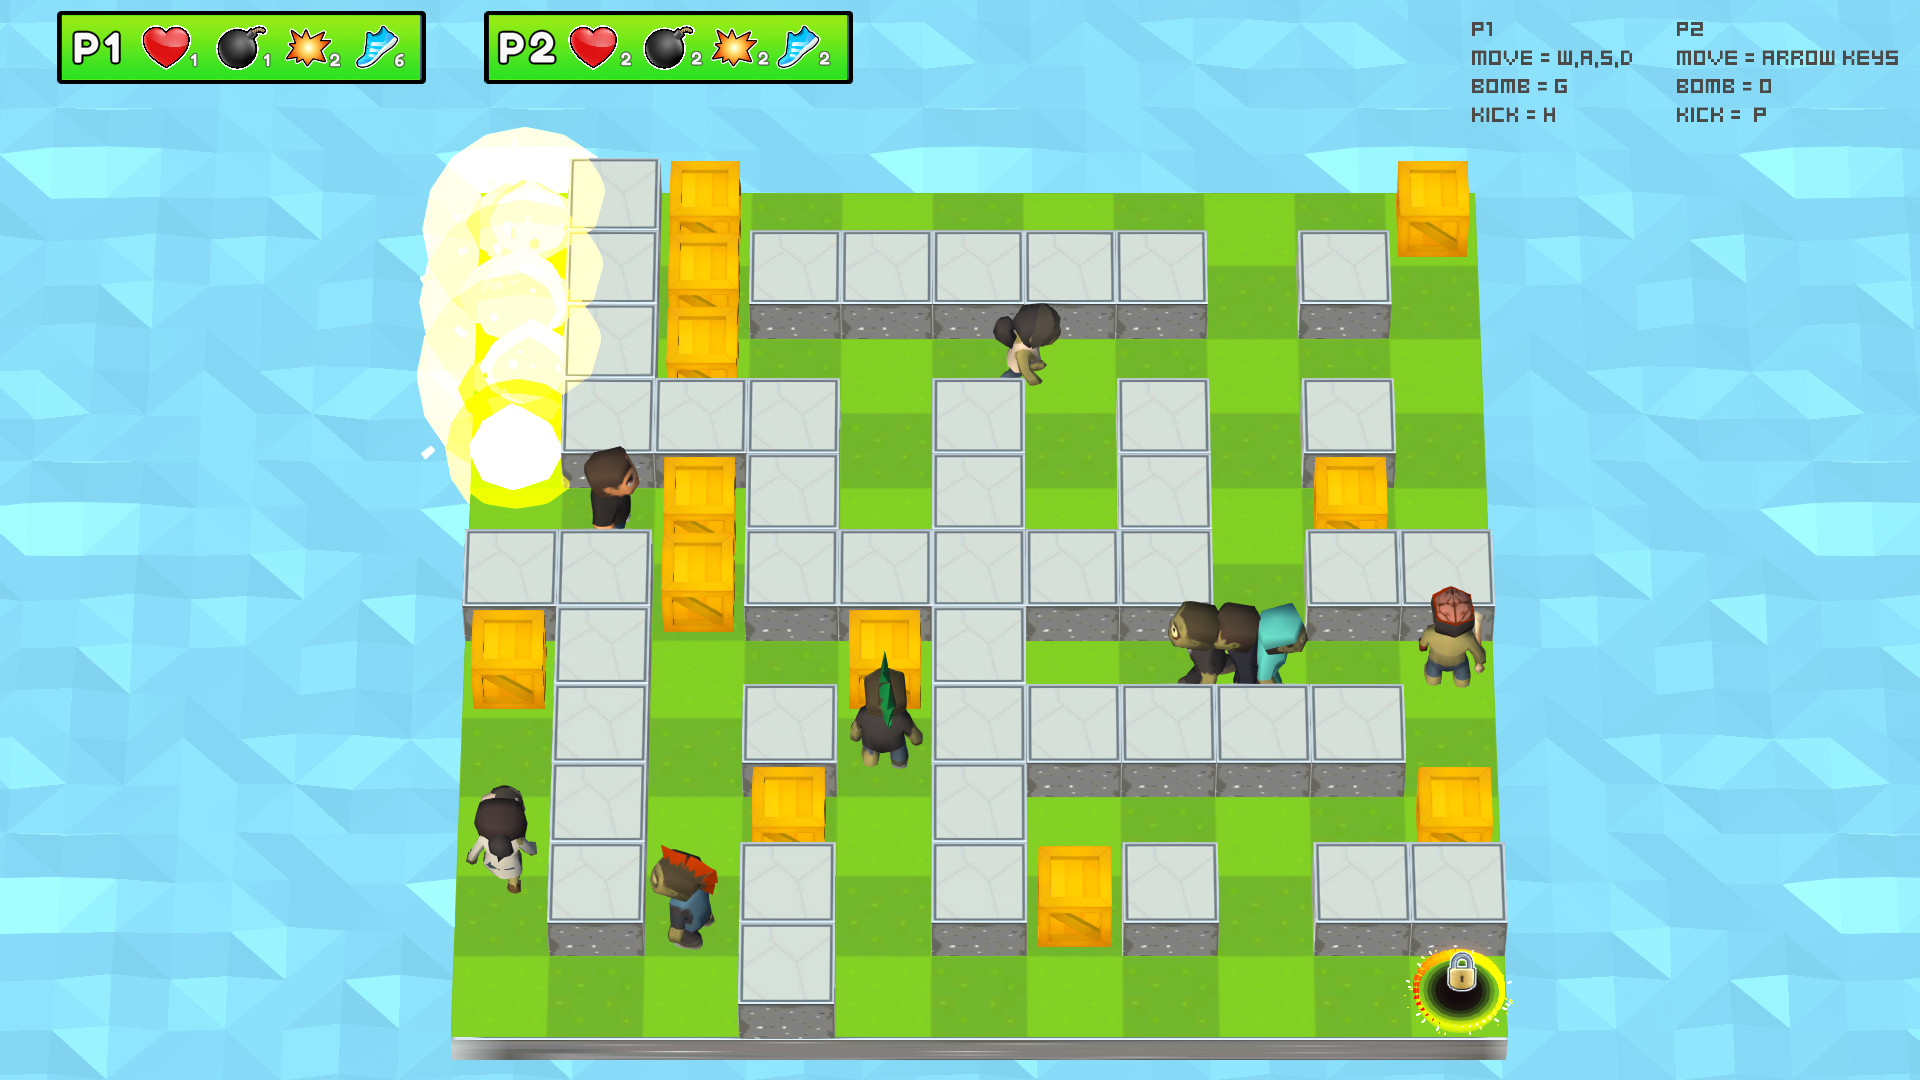 Stumble Guys: Multiplayer Royale - MMO Square